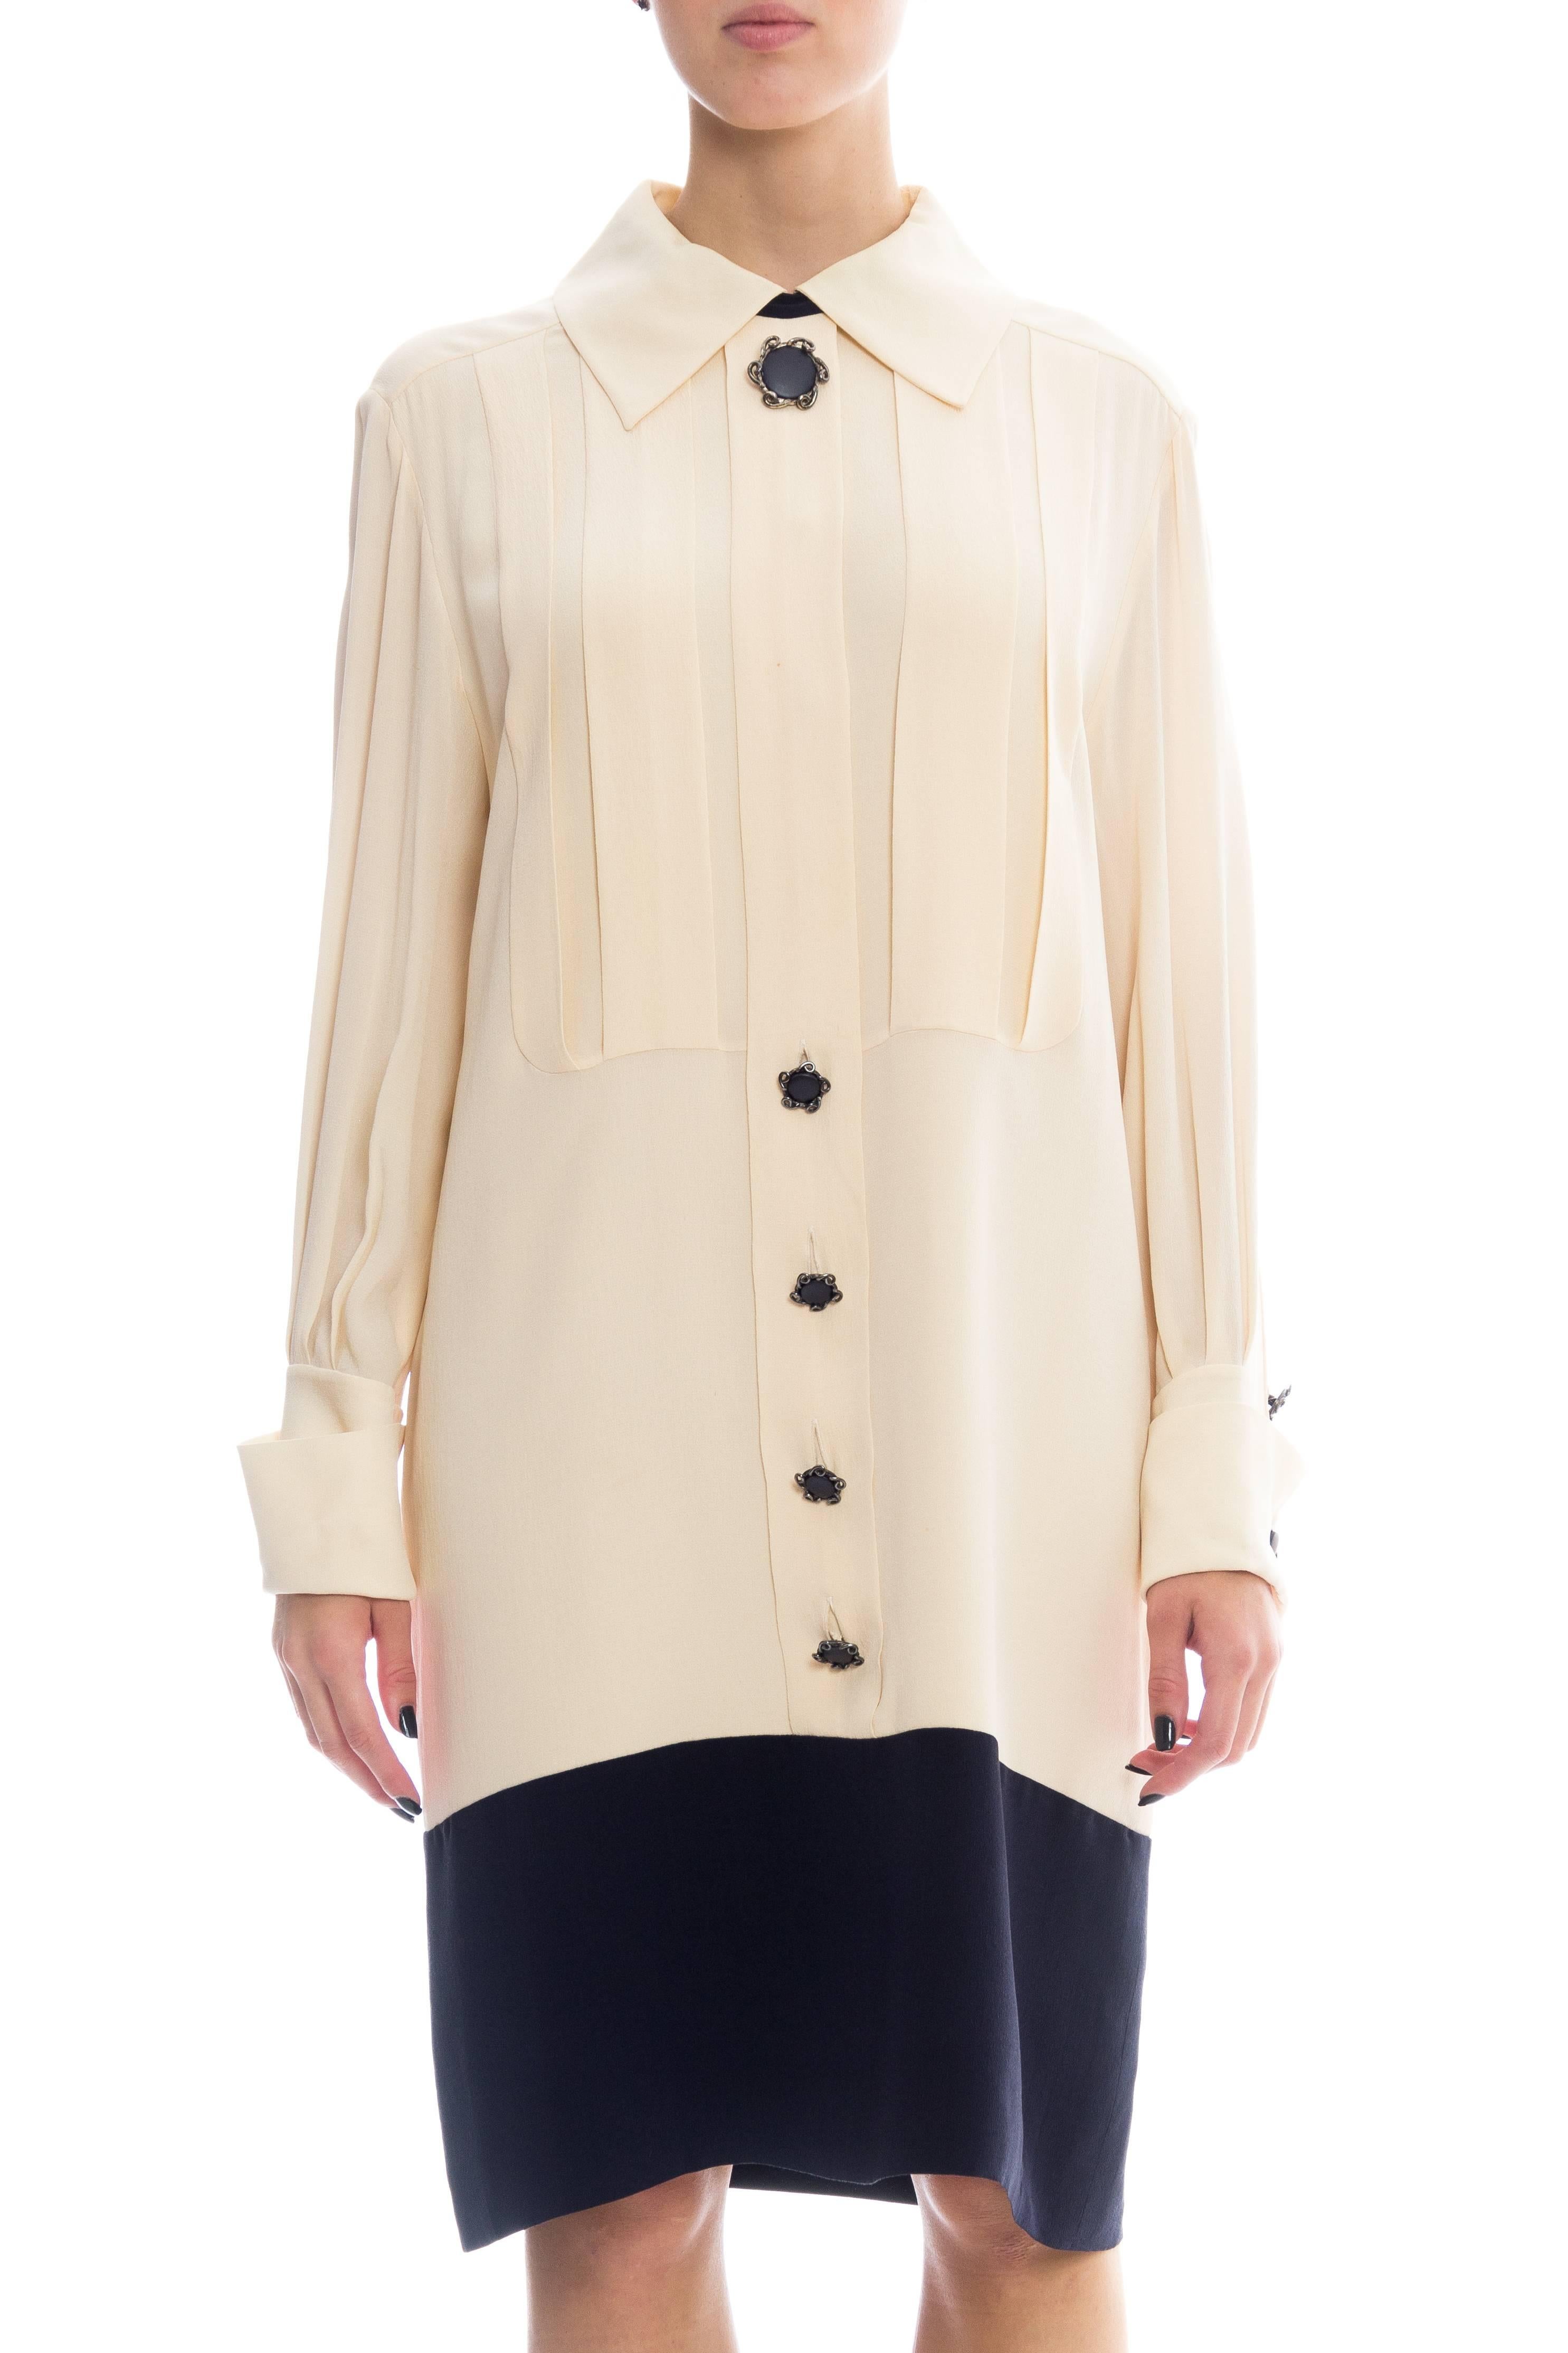 Karl Lagerfeld has beautifully interpreted a 19th century men's shirt into a lovely dress which can be just as formal as it is informal. In classic Karl cream and black this dress is flattering to every skin tone. The wonderful custom buttons which